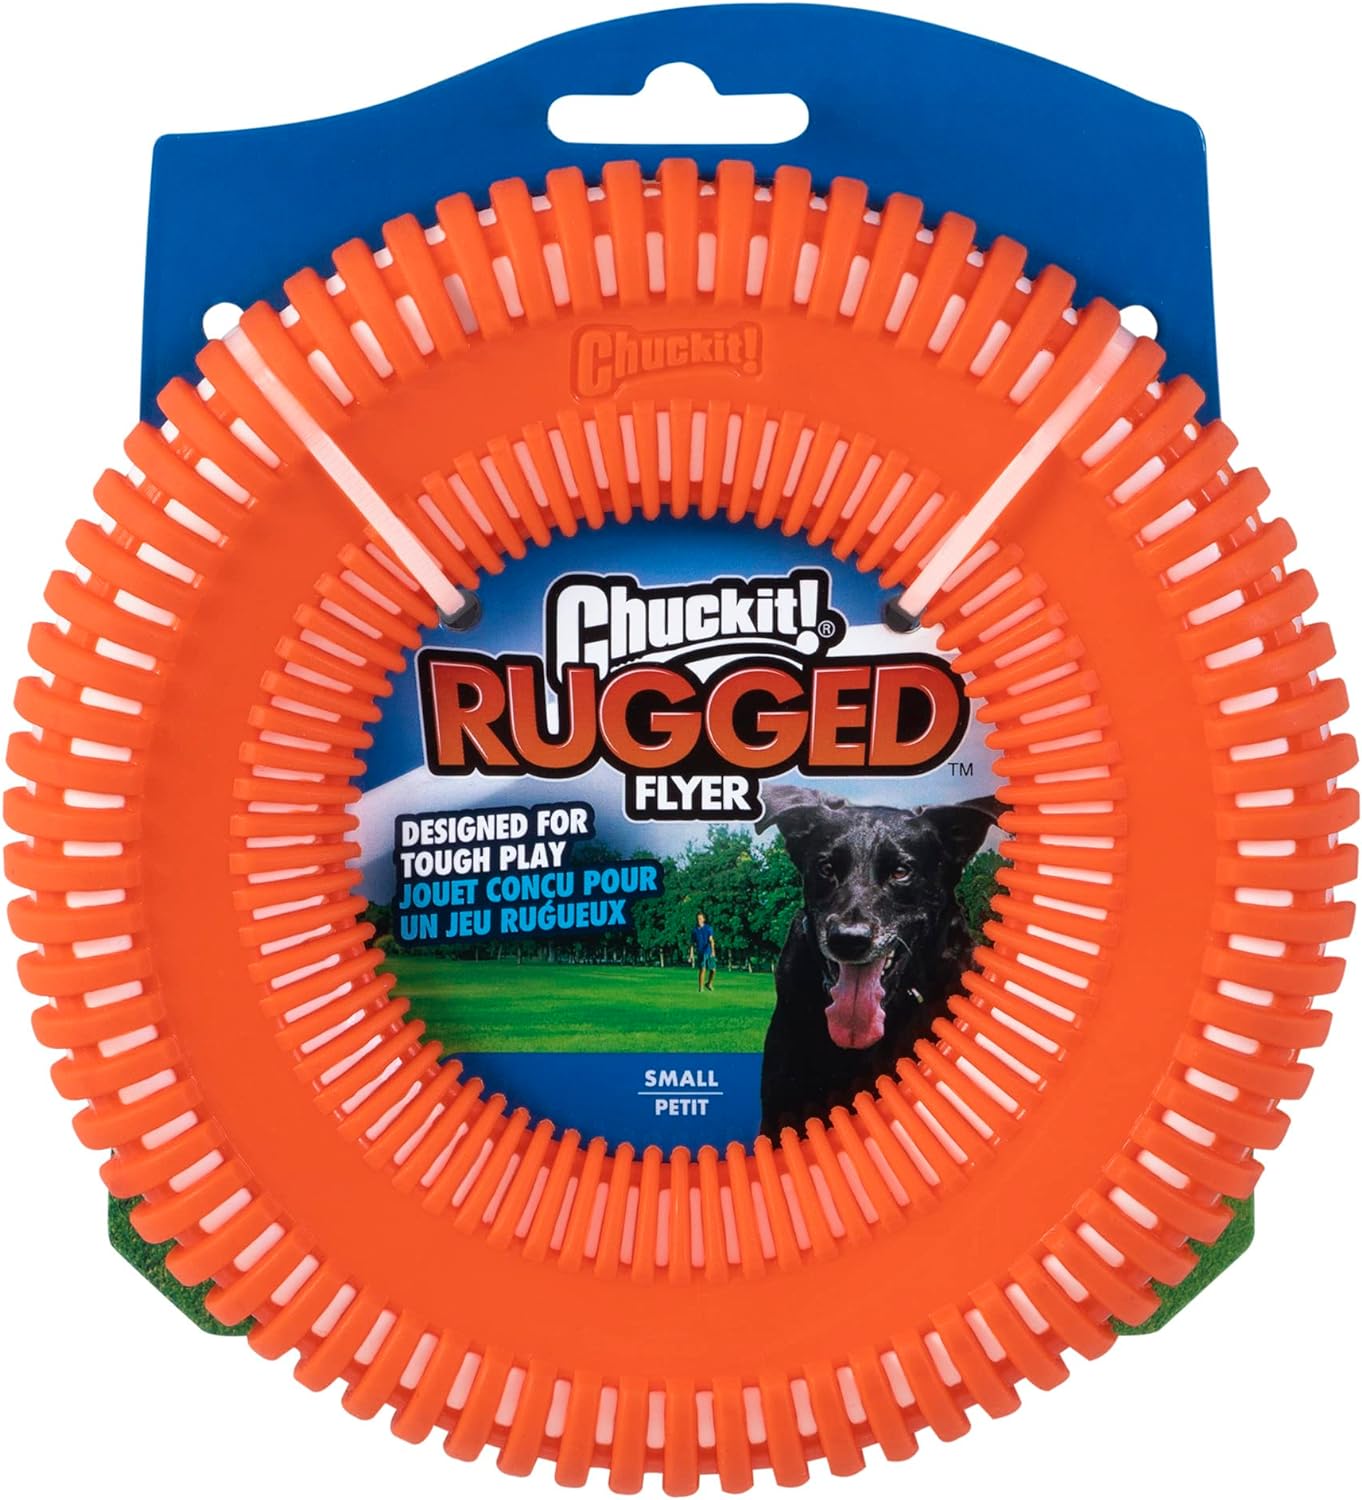 I've had this toy for about 9 months now, with it primarily living outside exposed to the elements. It' one of my dog' favorite toys. Sturdy enough to tug without worrying about ripping fabric like the other ChuckIt! toys, but not so hard you worry about breaking teeth like with hard plastic. Easy to throw and completely washable. The ridges are a nice added bonus as it seems to work almost like a dental chew. Considering getting another one just to have, even though my current one is still in